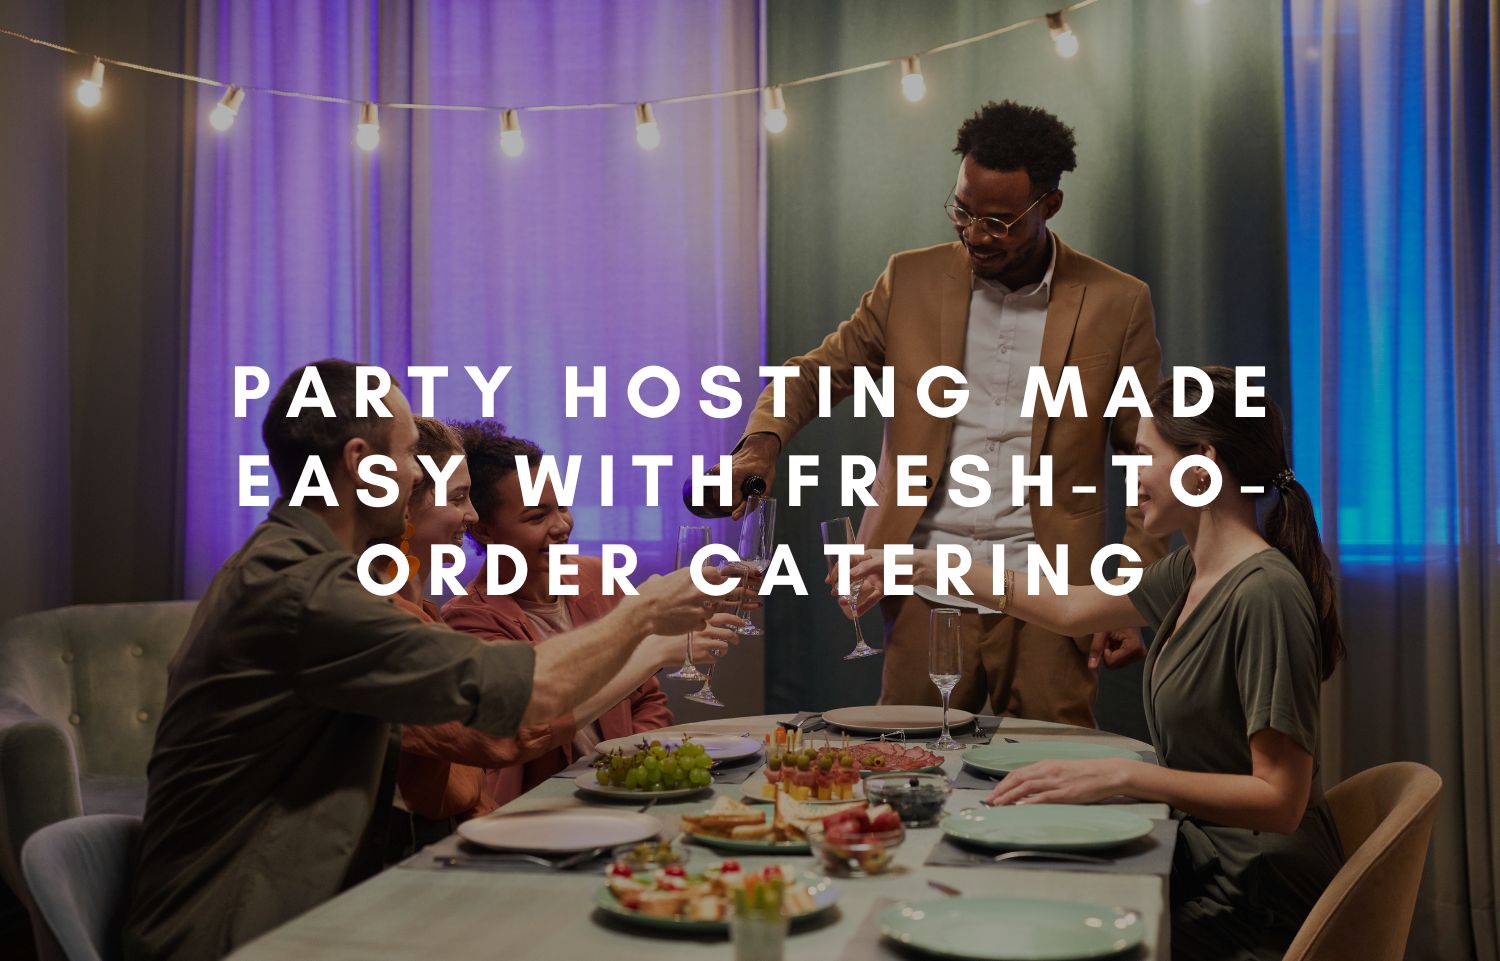 Party Hosting Made Easy with Fresh-to-Order Catering